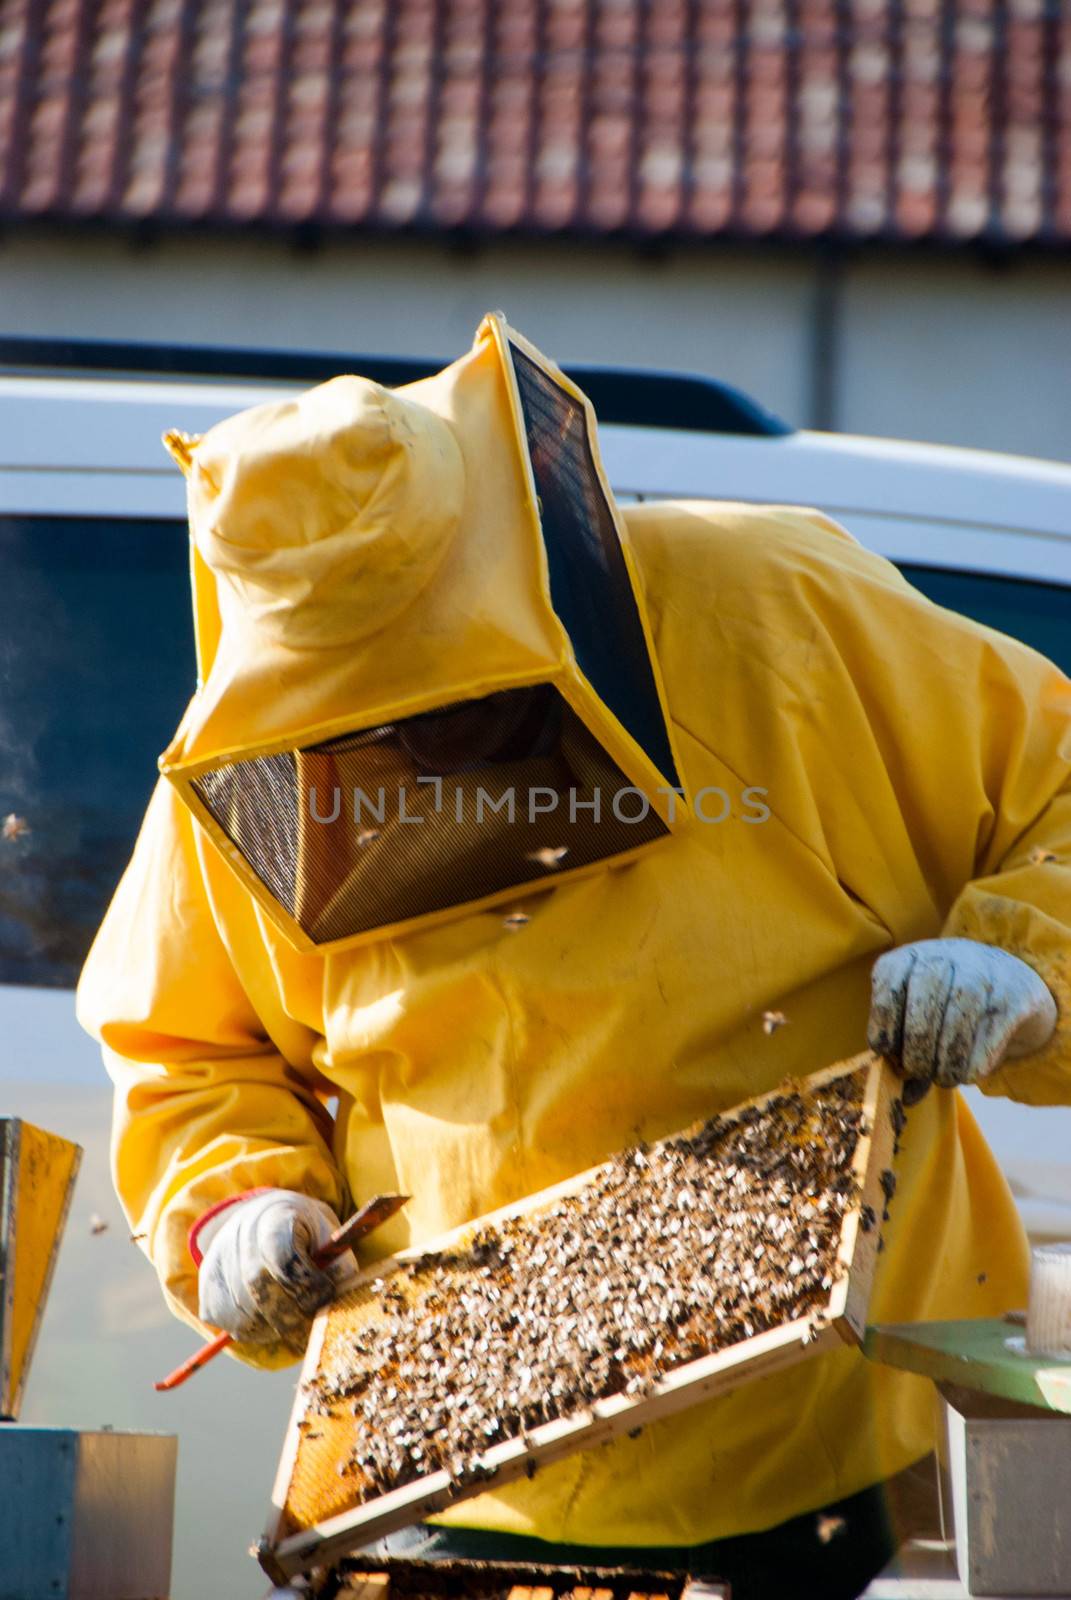 A beekeeper controls the honeys with bees